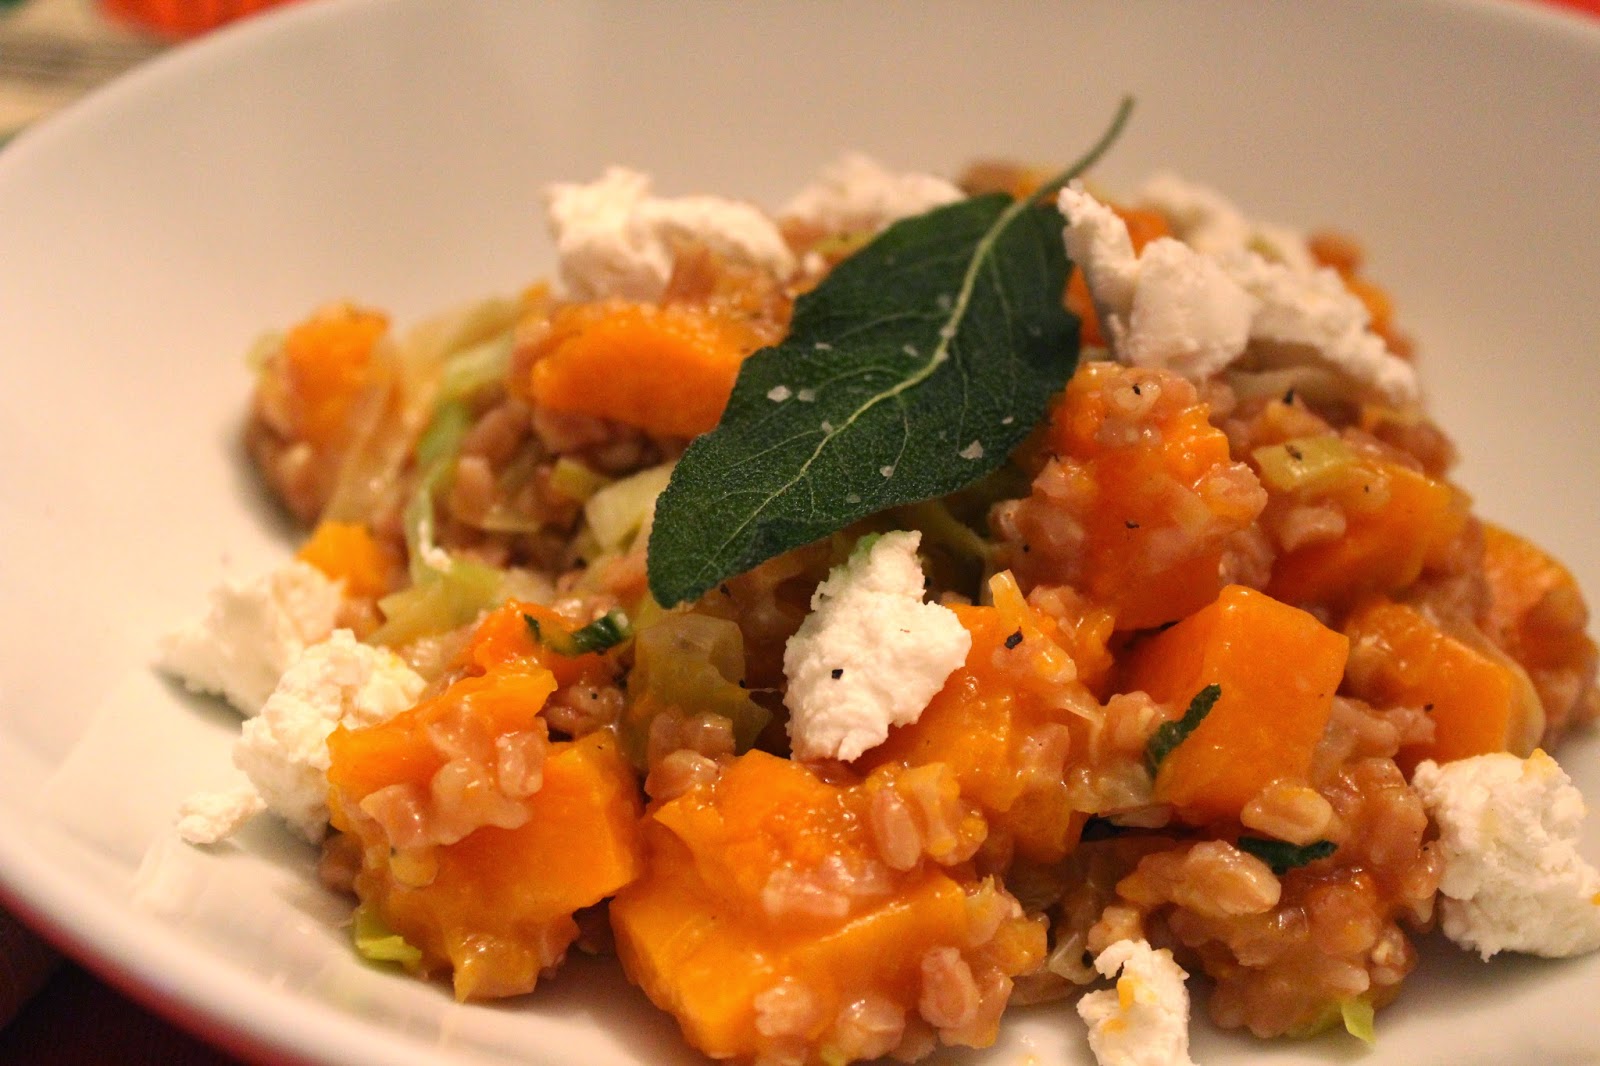 Farro risotto with butternut squash, sage, and goat cheese